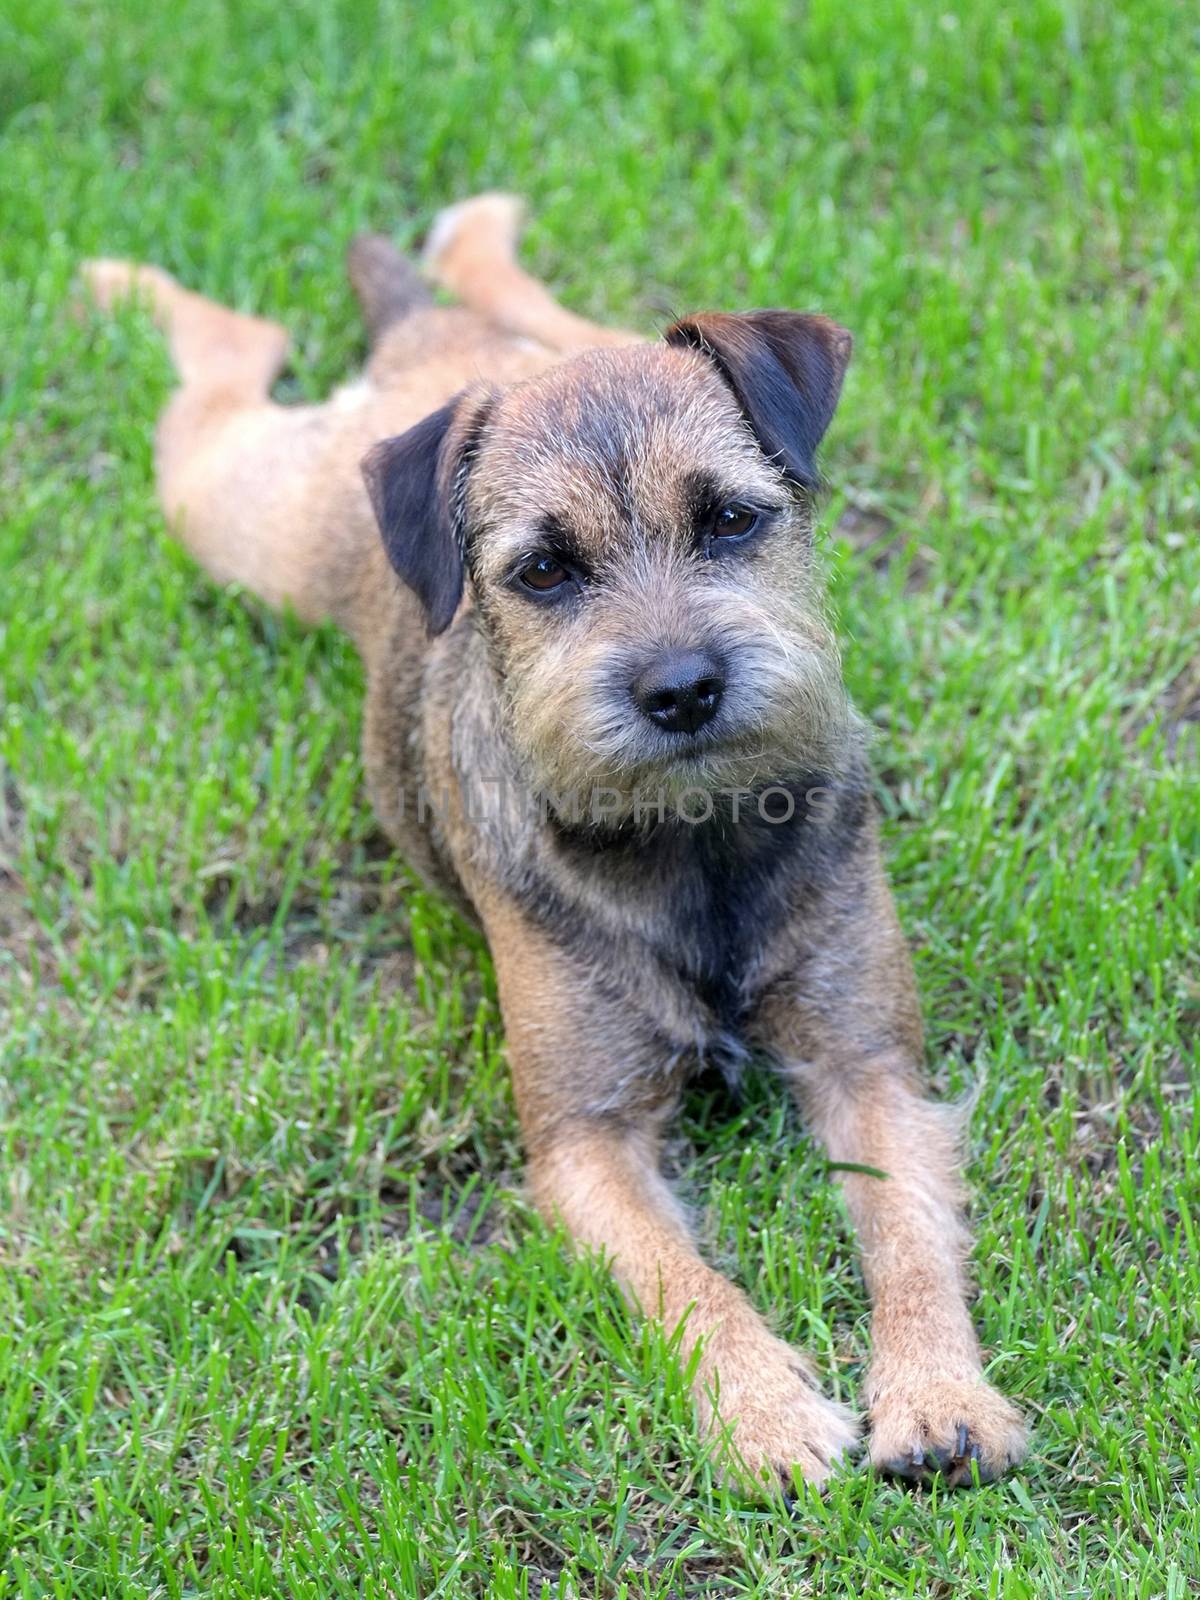 Puppy Border Terrier on a meadow